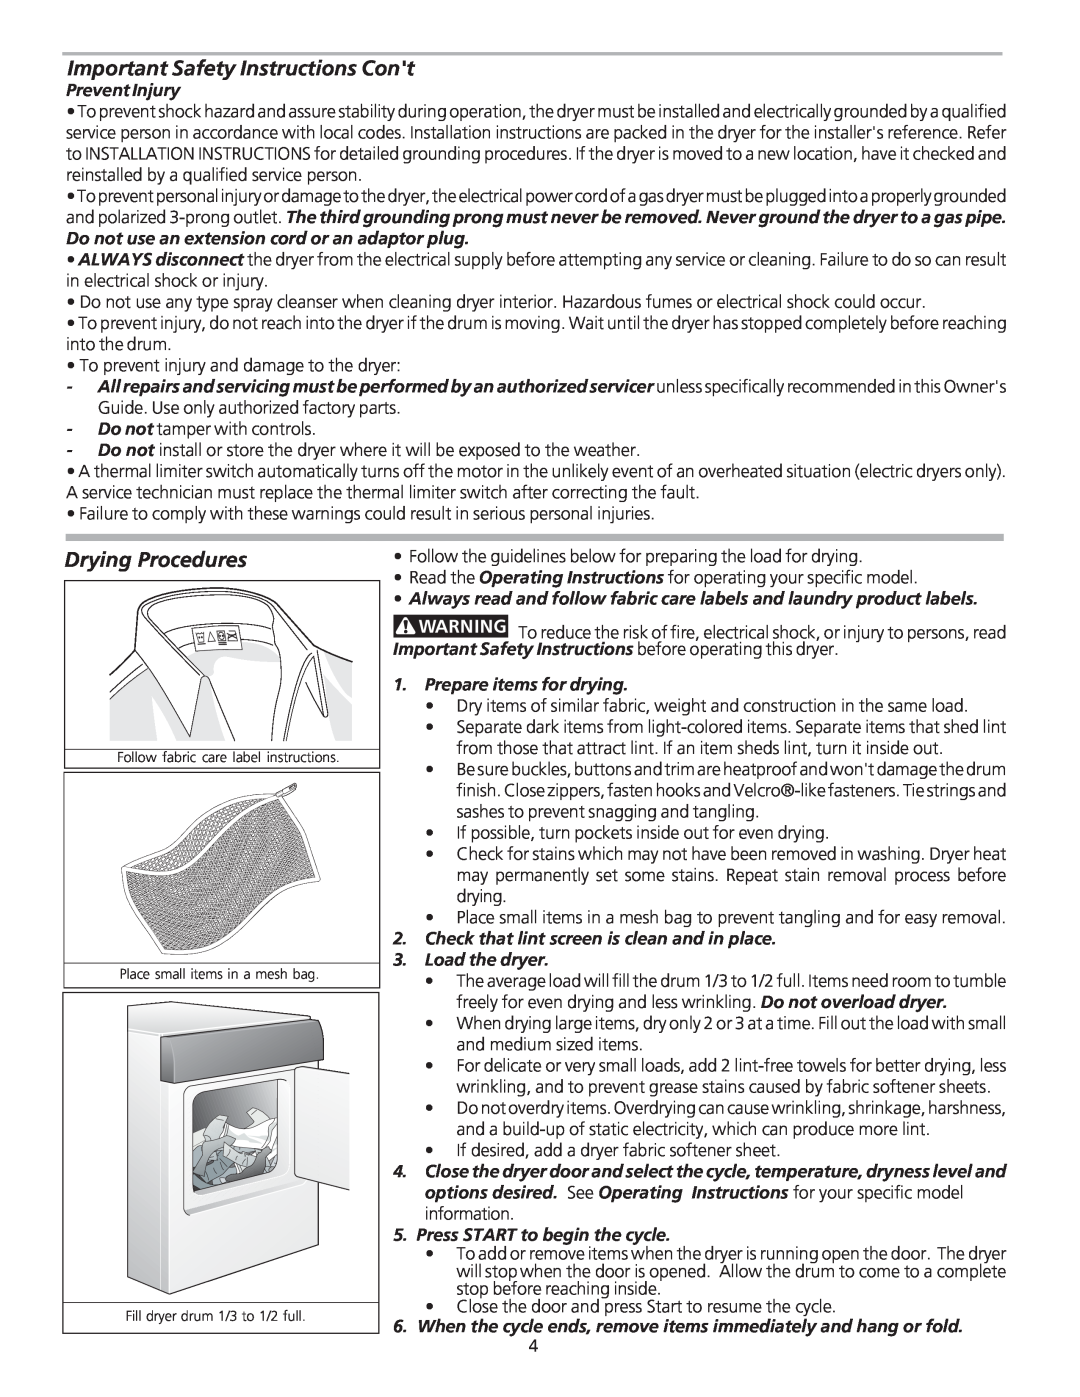 Frigidaire 134763300A manual Prevent Injury, Do not use an extension cord or an adaptor plug, Prepare items for drying 